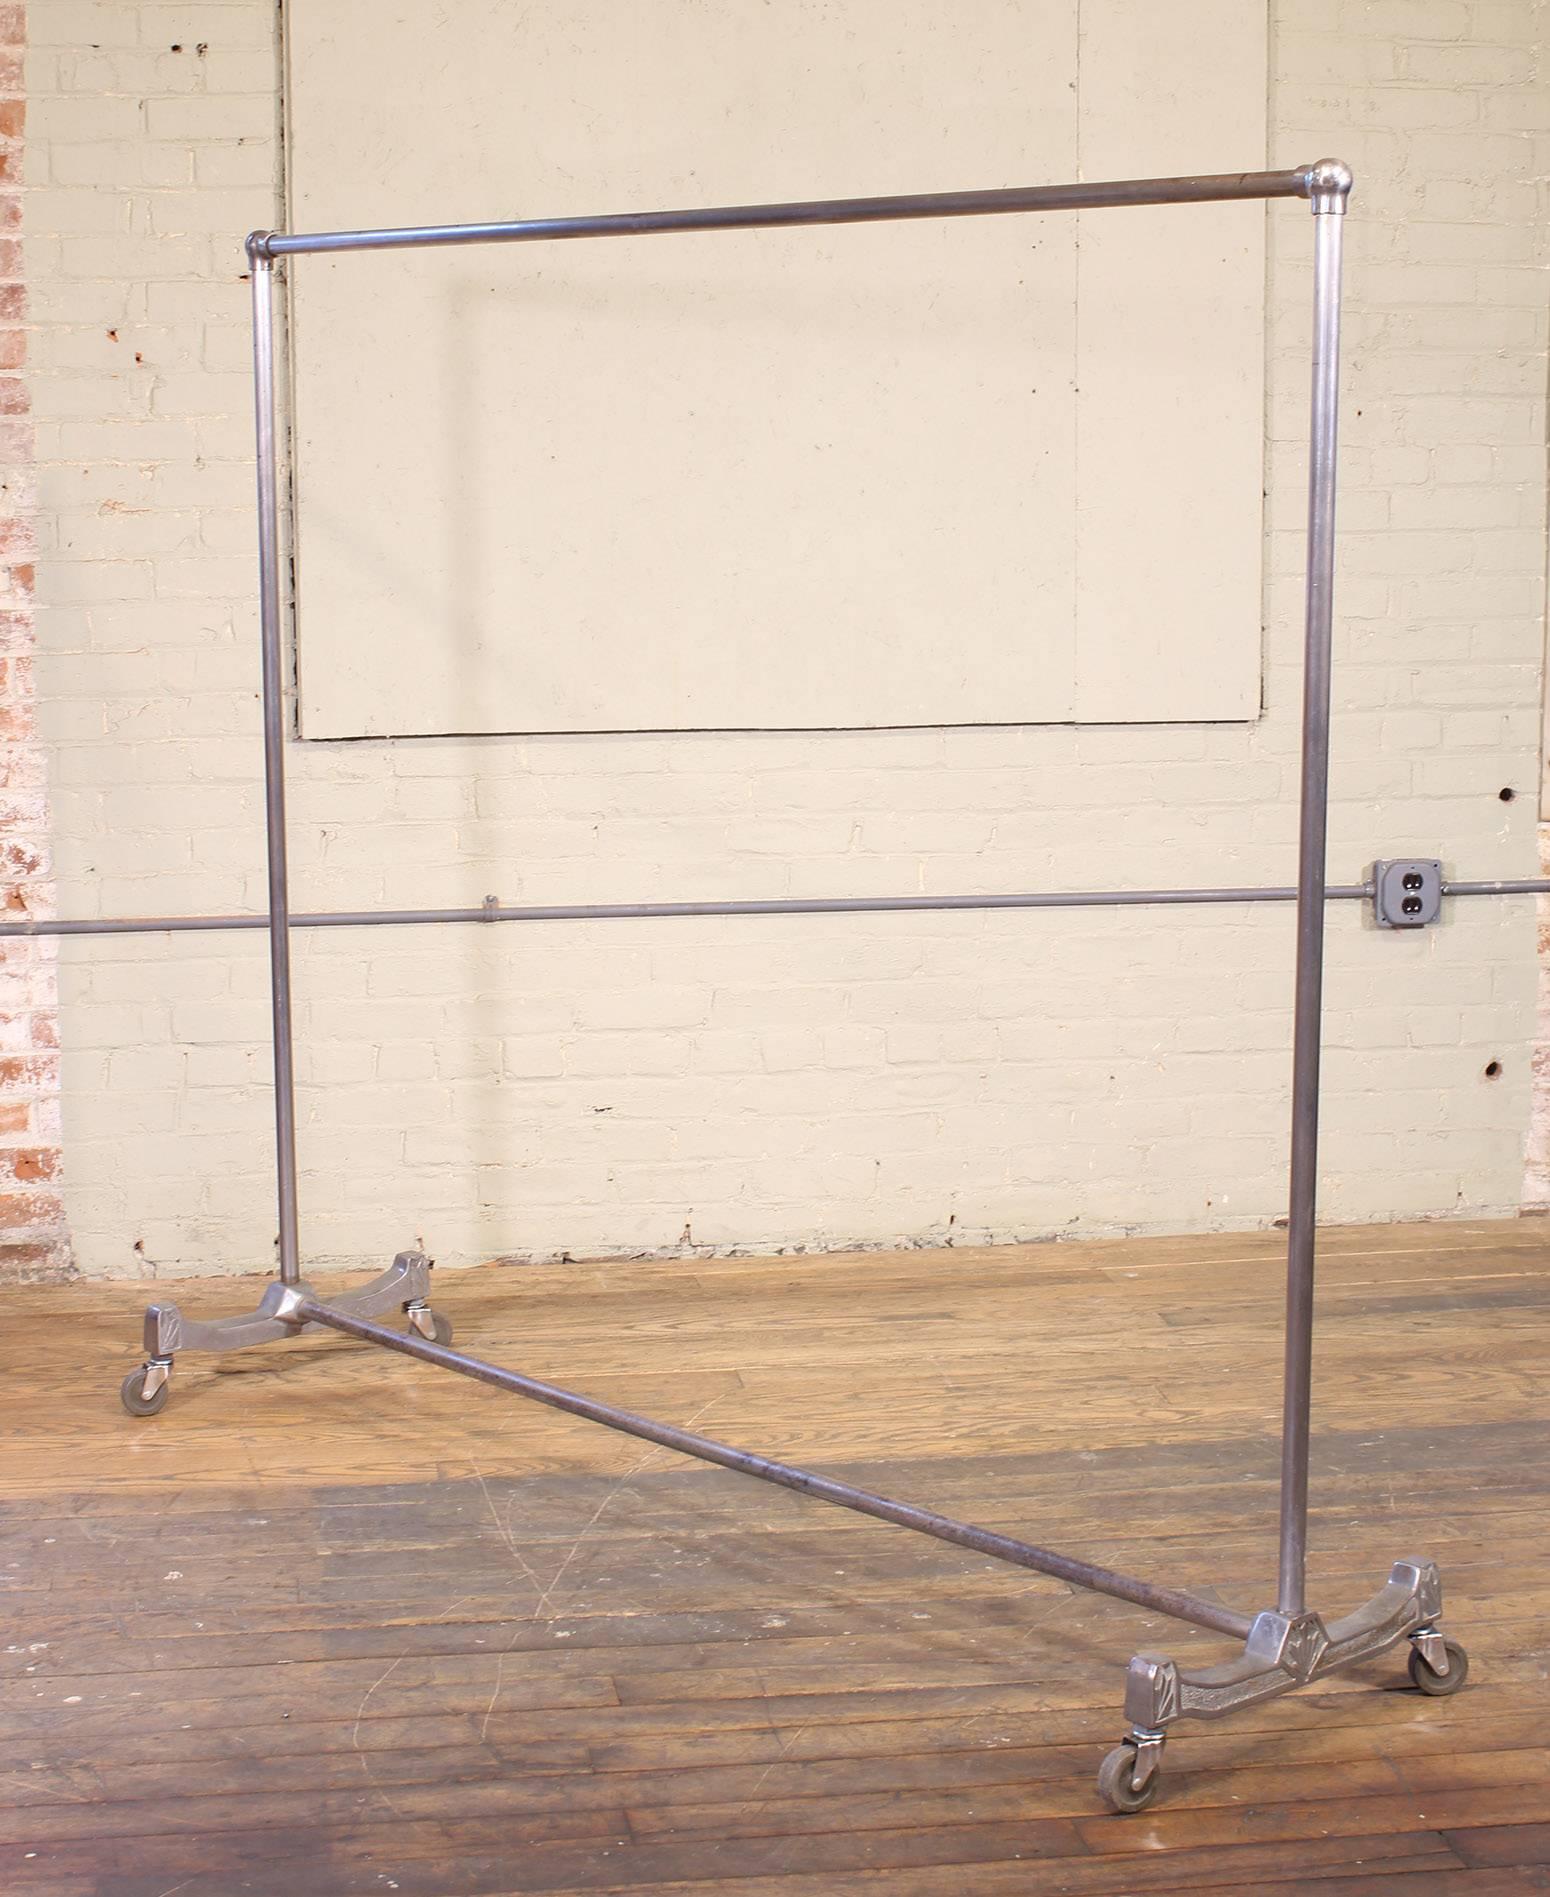 Vintage Art Deco garment rolling coat, clothing rack, stand. Made from cast aluminium, iron and steel. Measures: 62 3/4